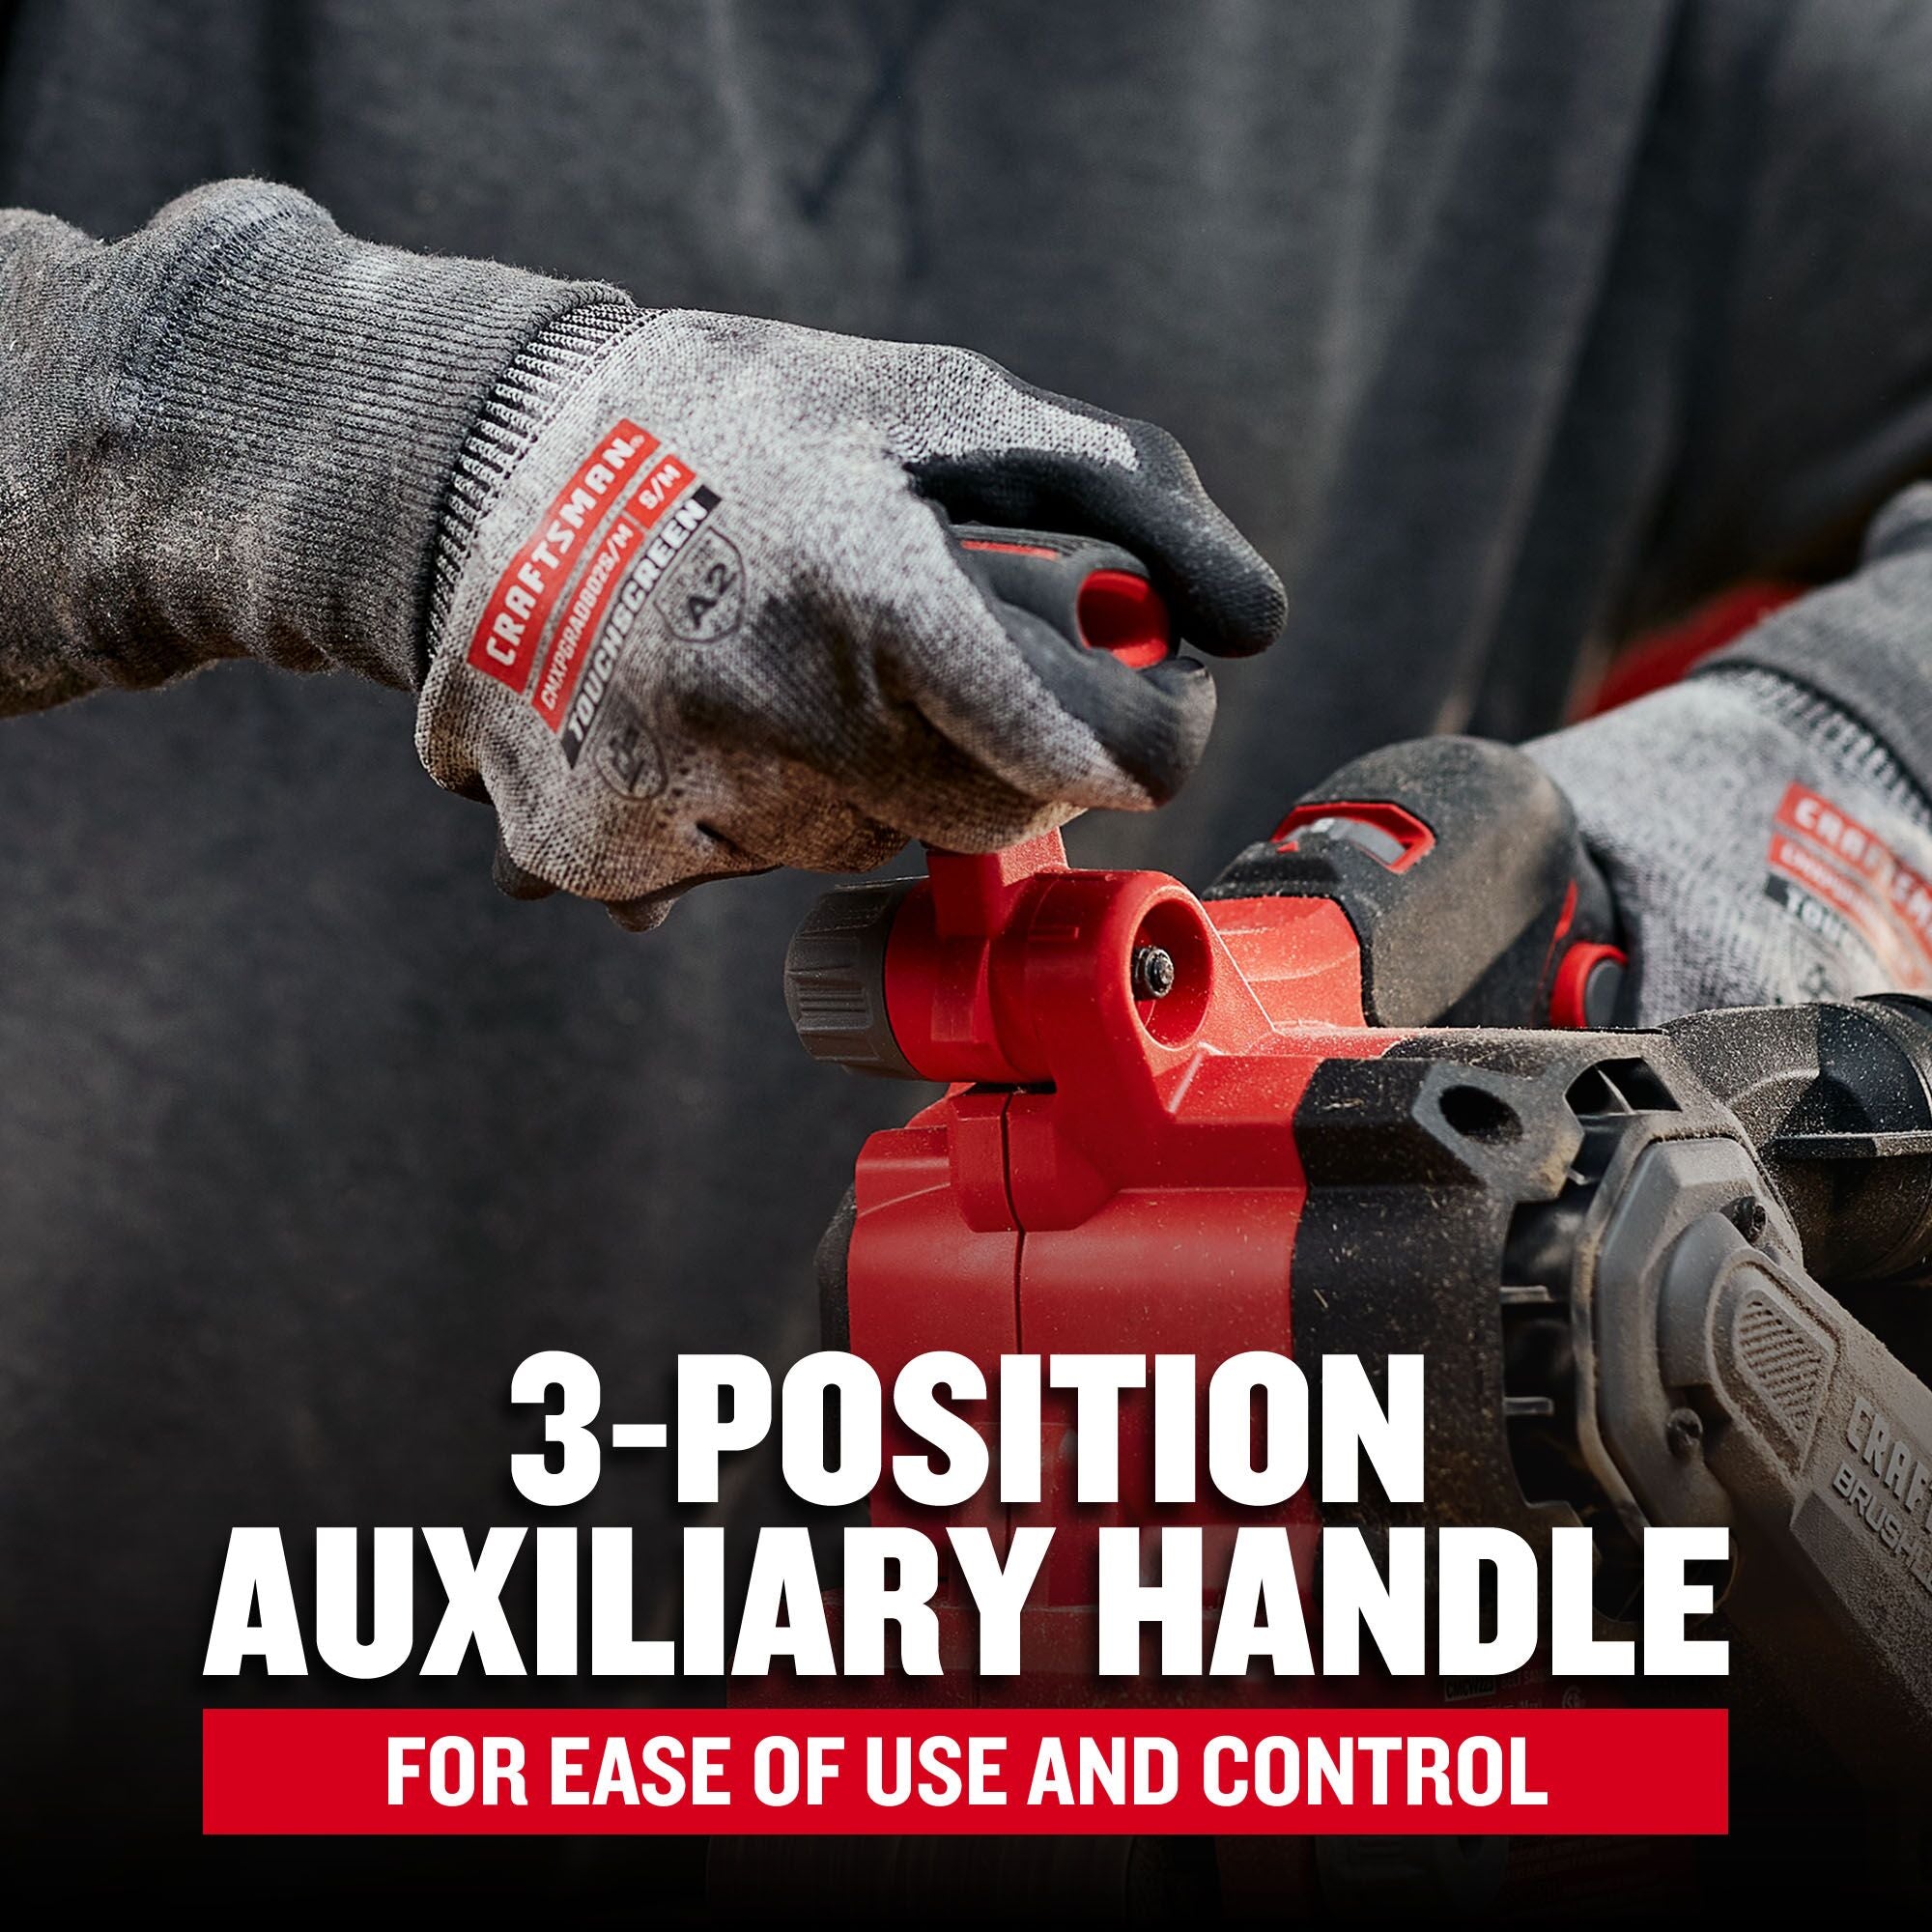 3 position auxilary handle for ease of use and control